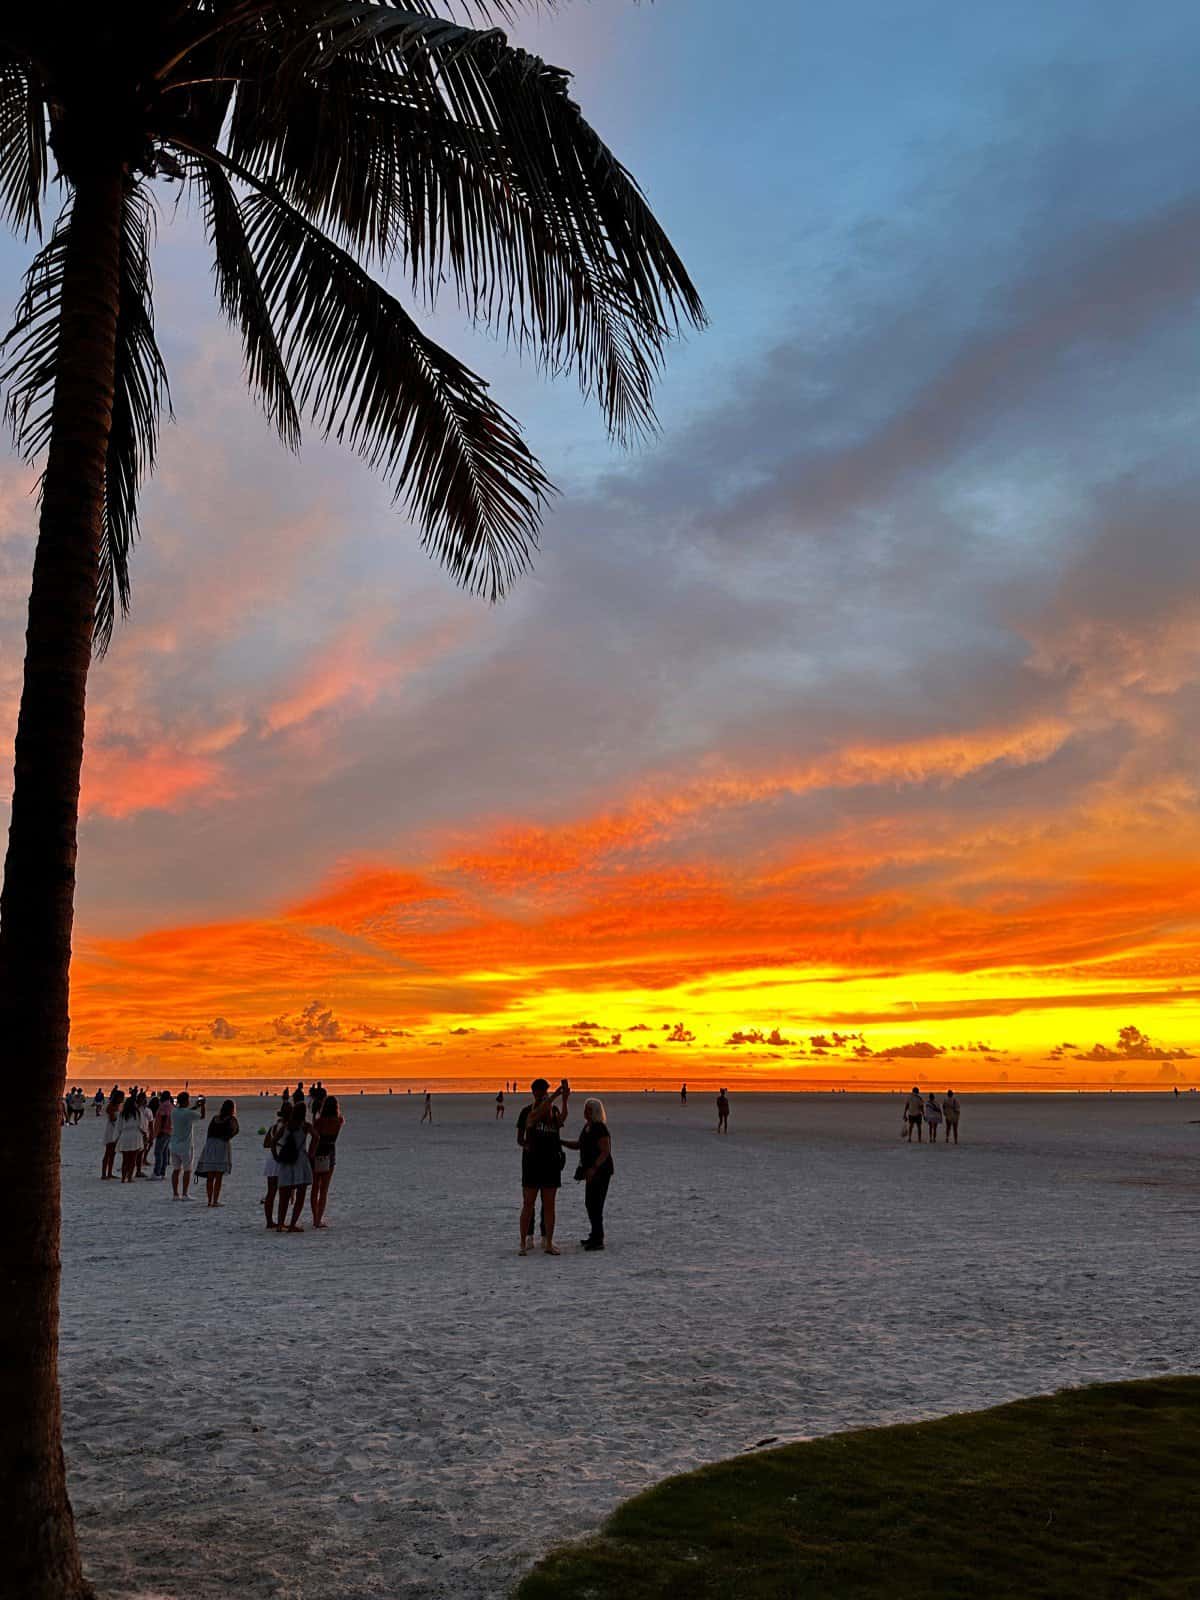 Marco Island is known for its sunsets, and the ones at JW Marriott Marco Island are amazing